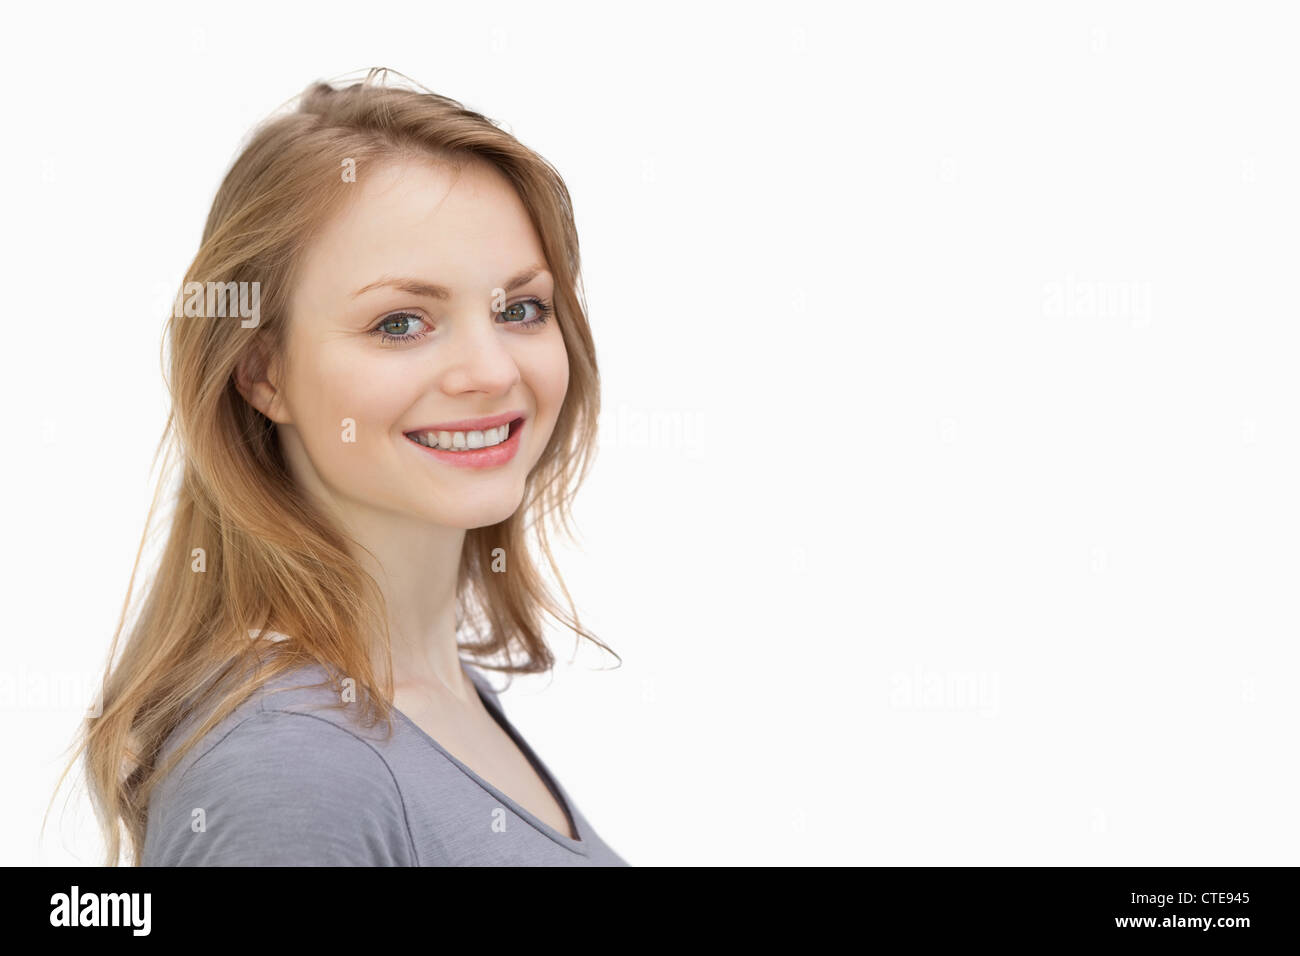 Woman smiling while looking at camera Banque D'Images